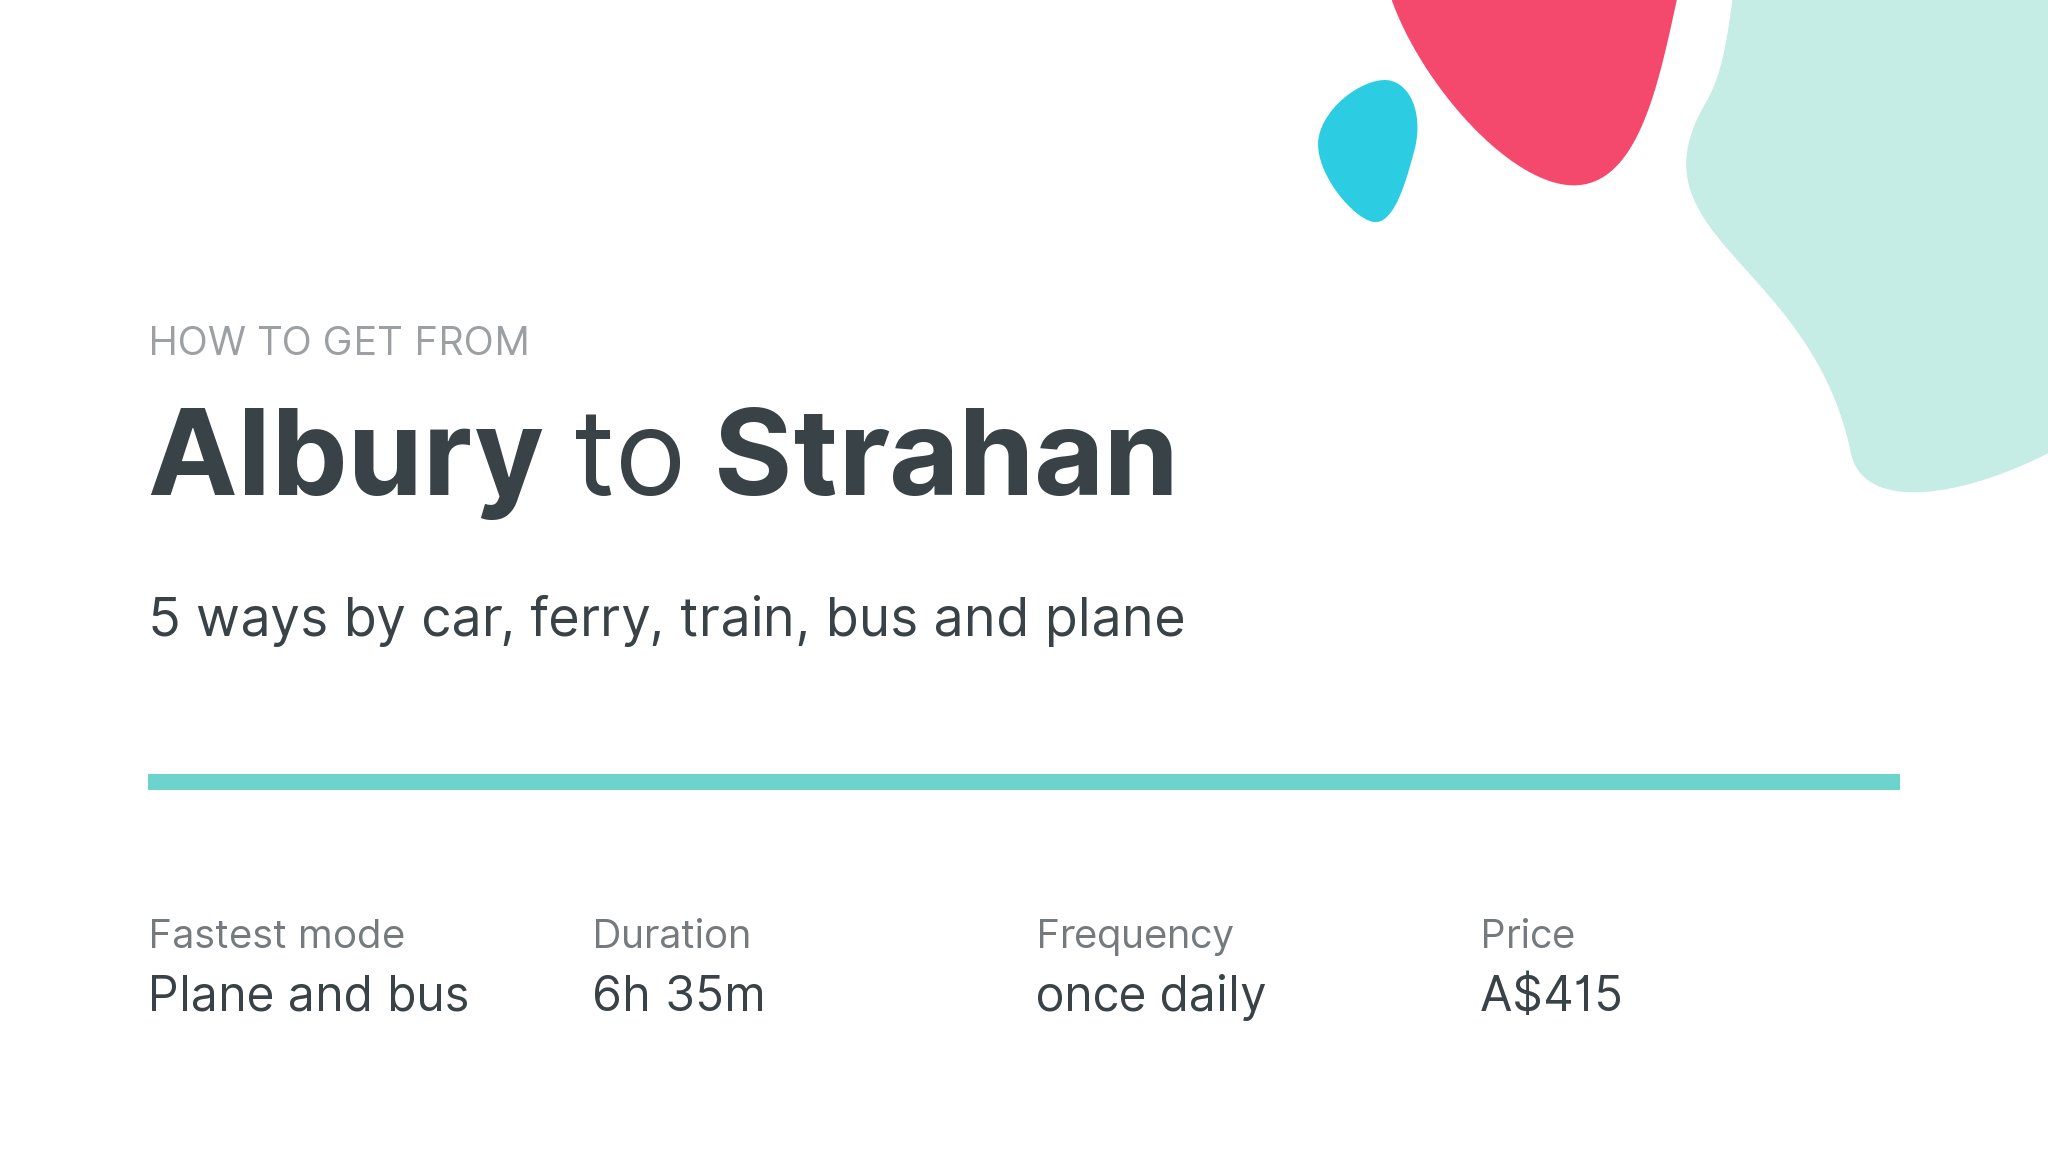 How do I get from Albury to Strahan